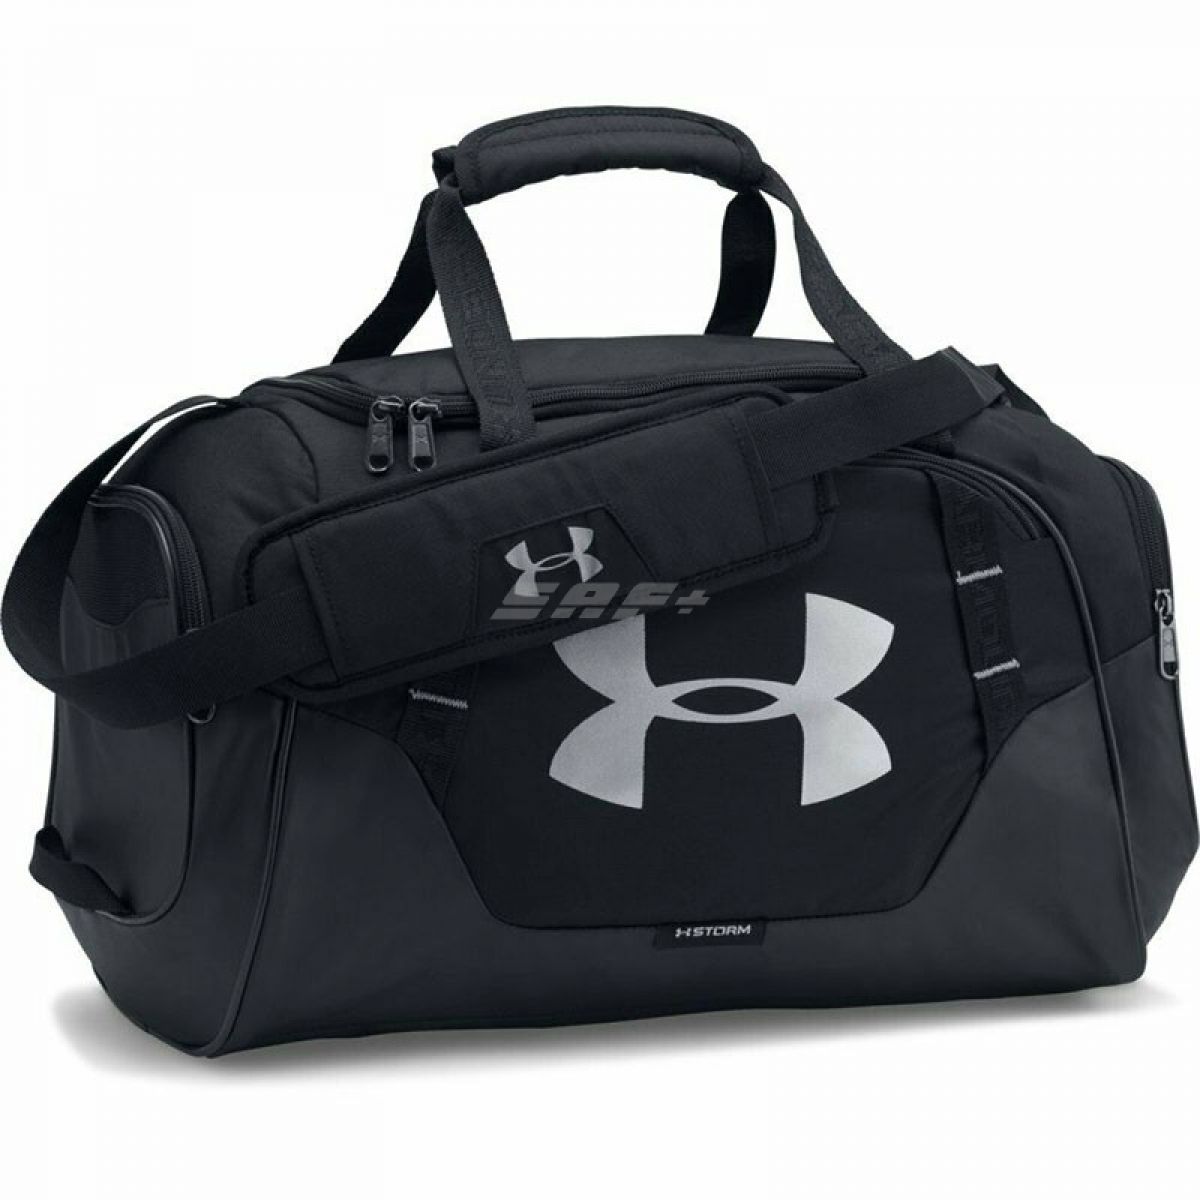  UNDER ARMOUR Undeniable Duffel 3.0